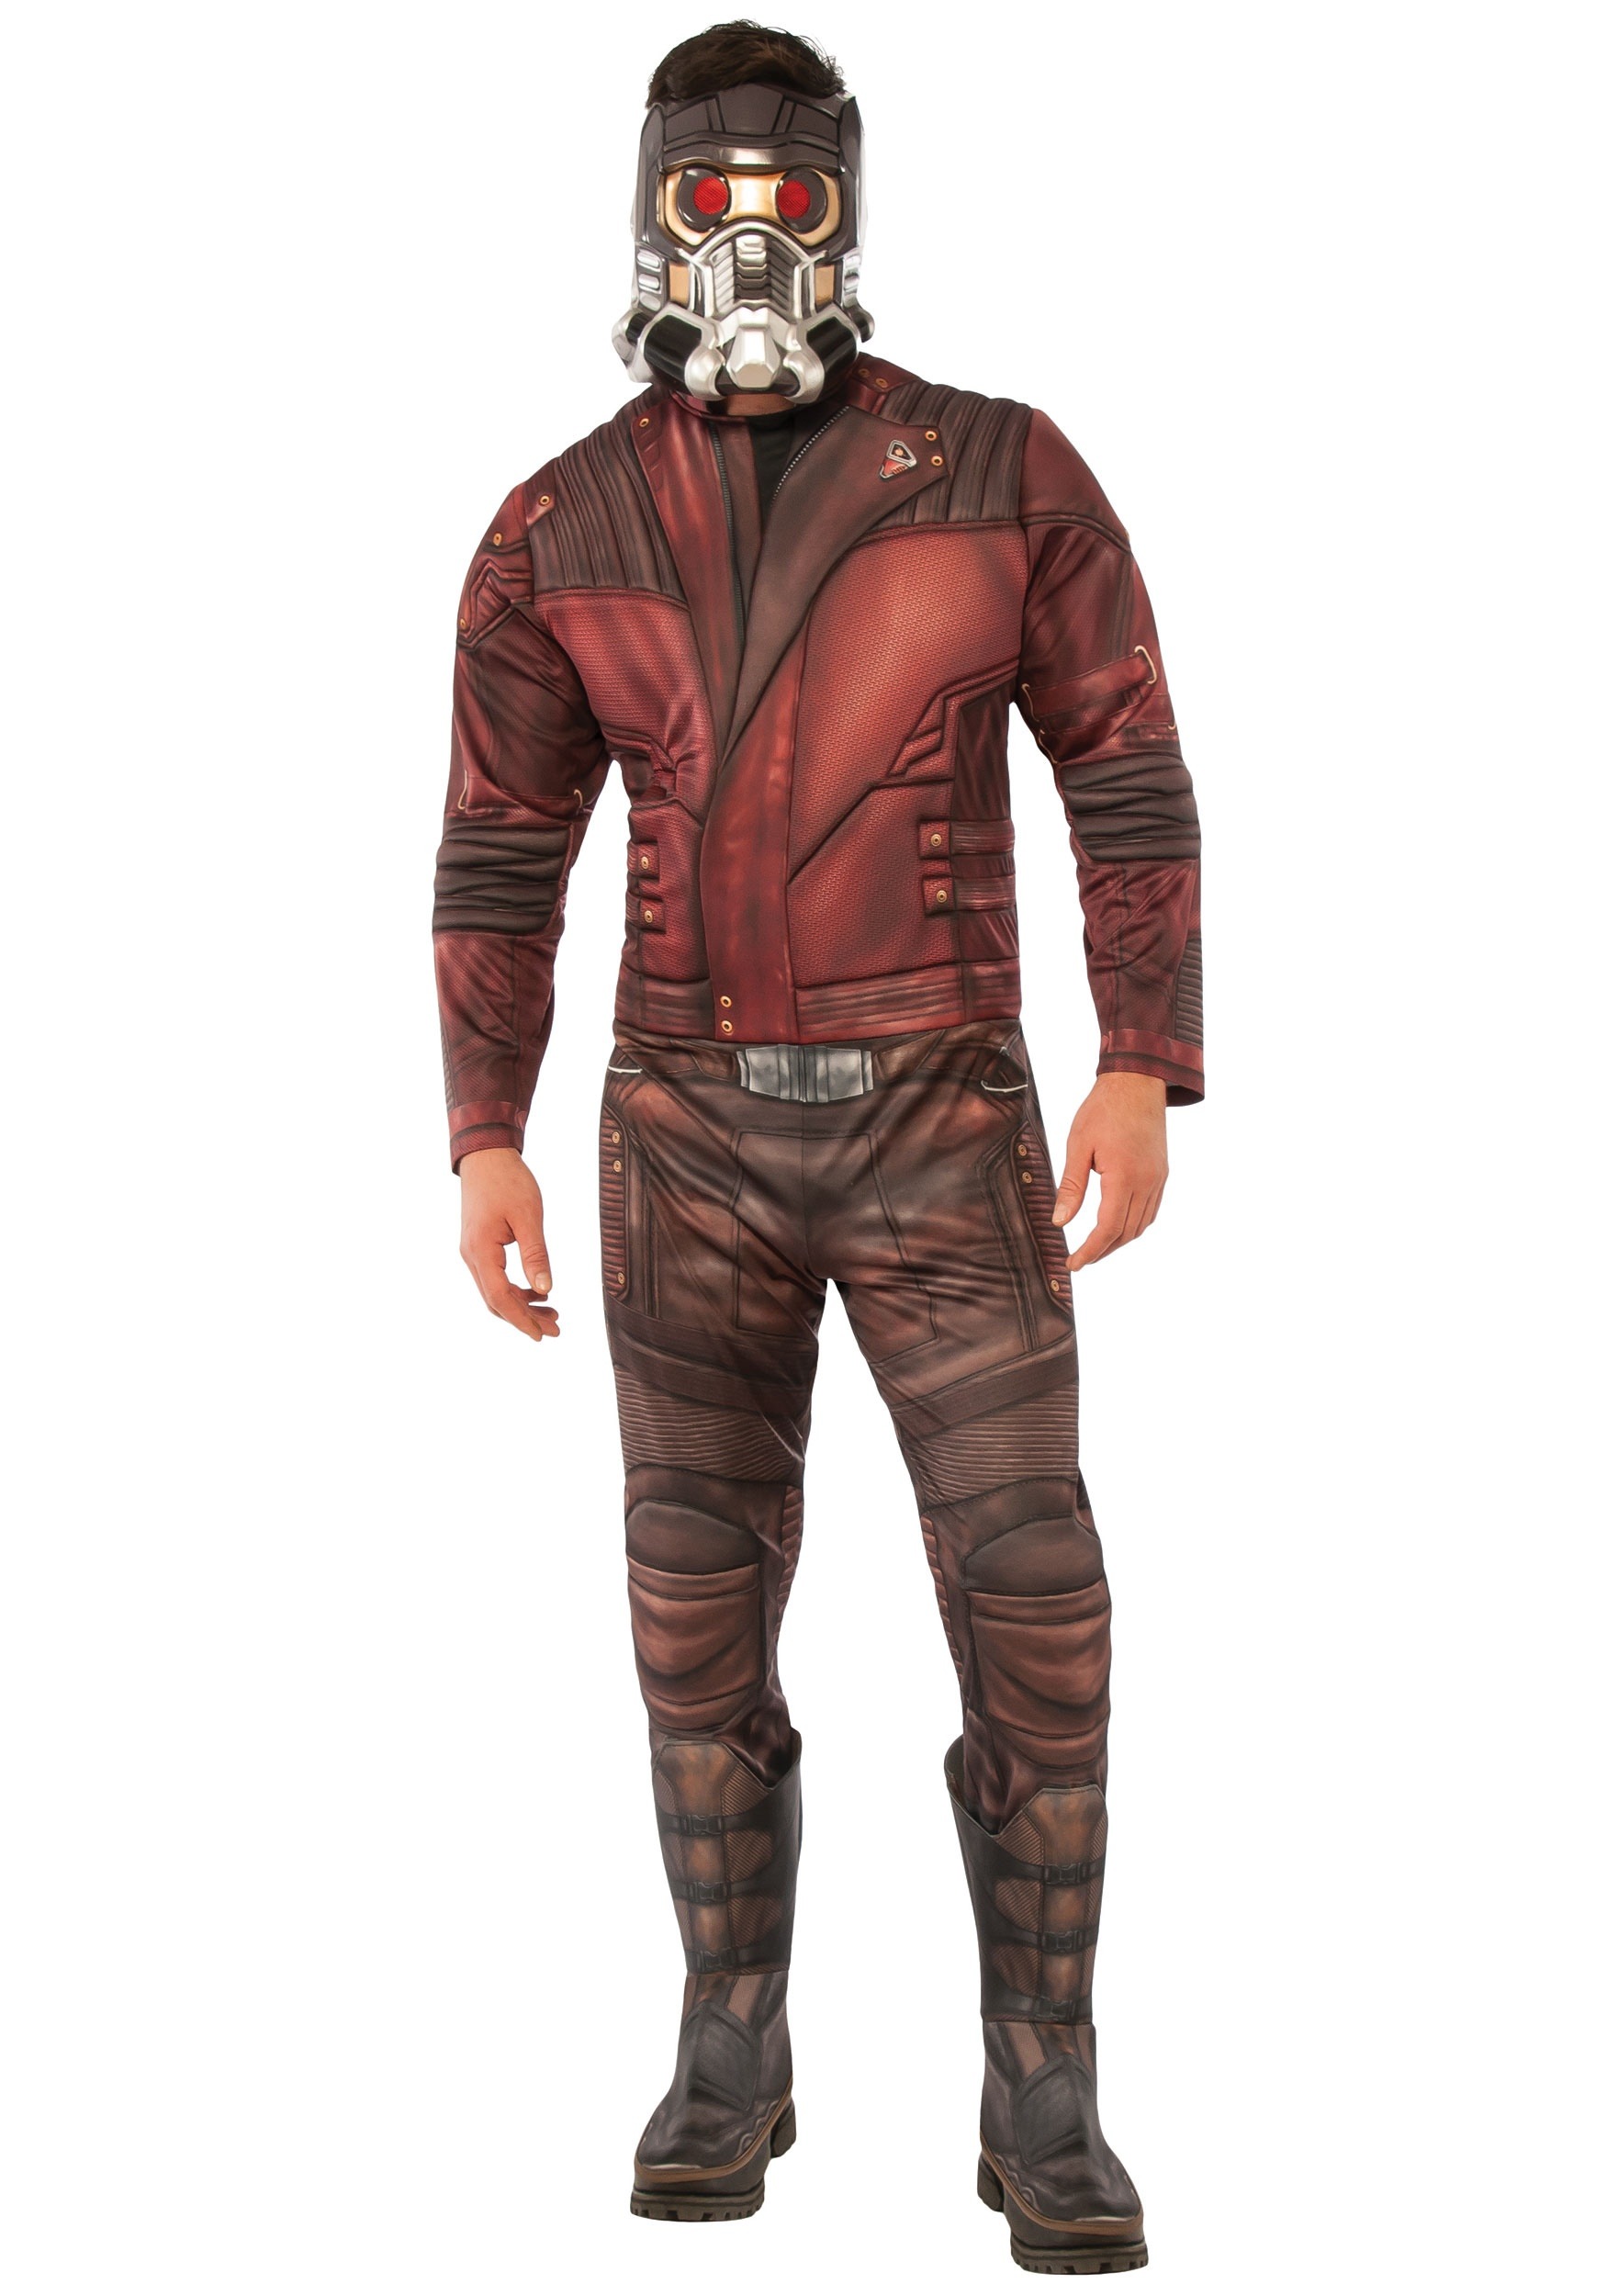 Deluxe Guardians of the Galaxy Star Lord Costume for Men | Marvel Costumes